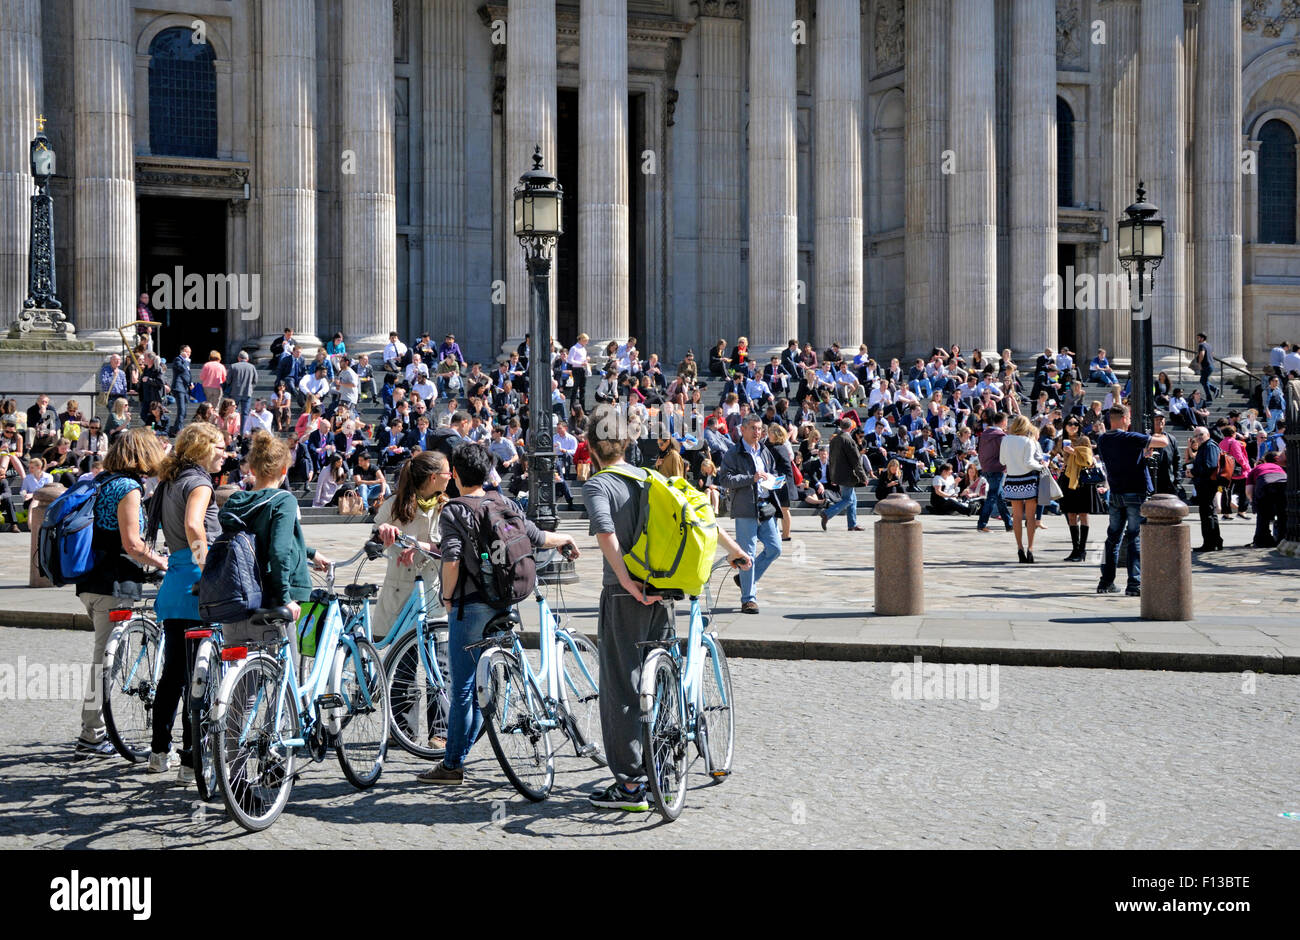 London, England, UK. People sitting in the sun on the steps of St Paul's Cathedral - group of cyclists Stock Photo